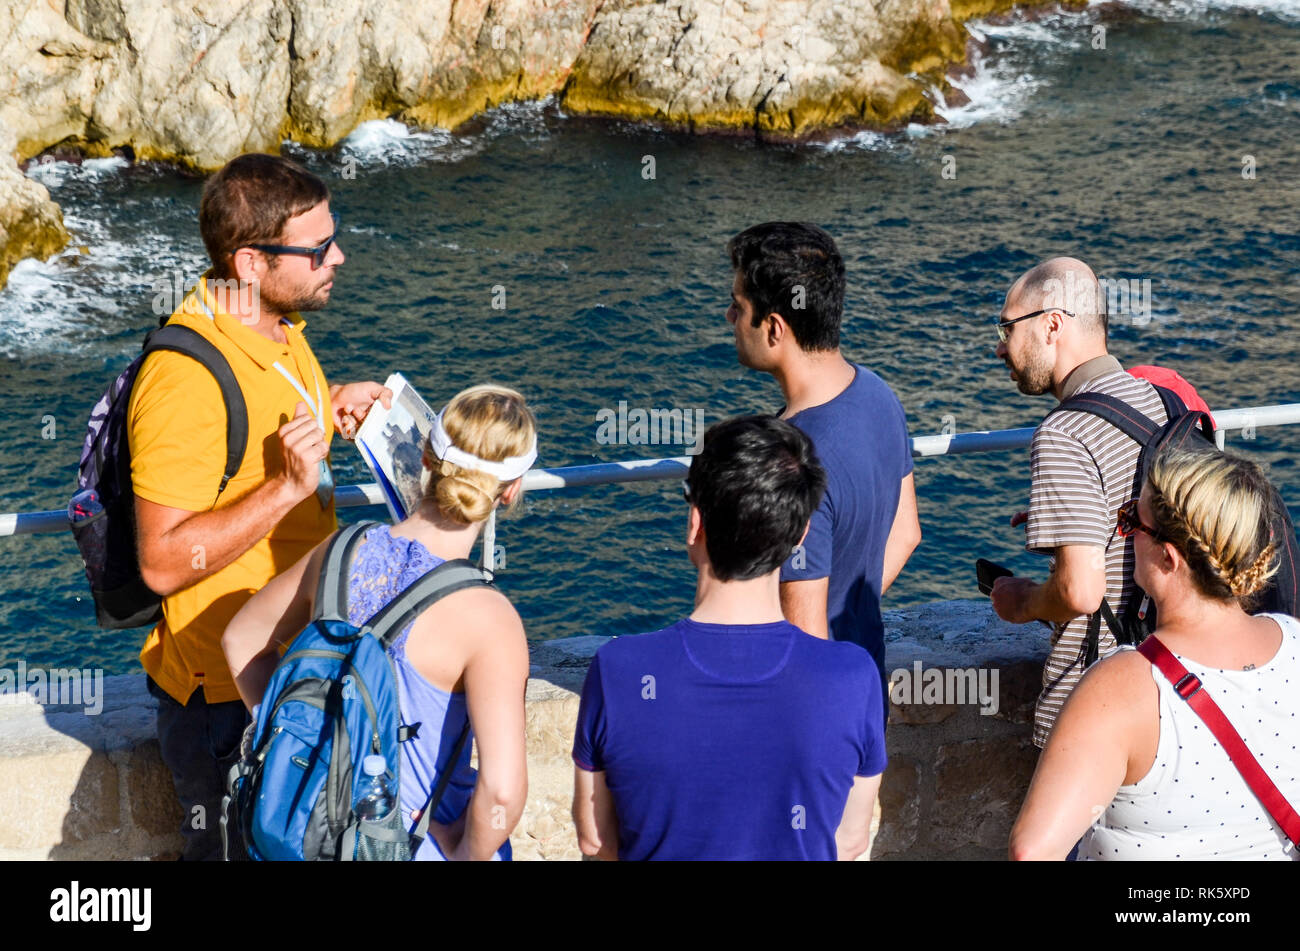 Mass tourism in Dubrovnik, Croatia: crowds of visitors join 'Game of Thrones' tours, exactly where the series were shot in the UNESCO heritage site Stock Photo